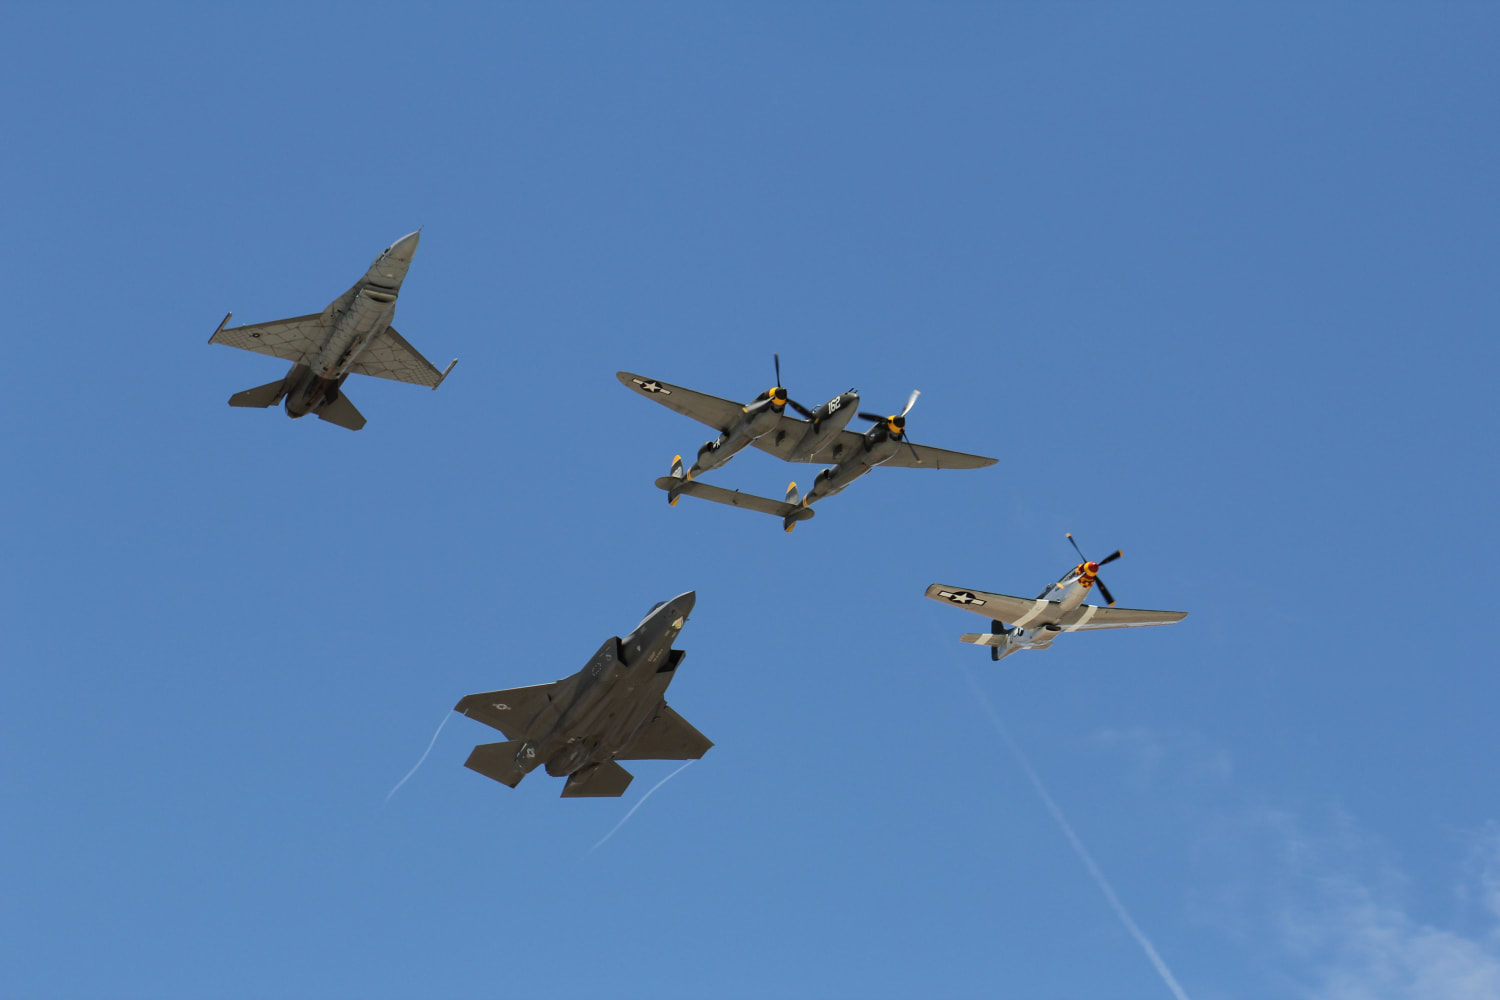 Amazing formation of warbirds over Travis AFB today at their open house airshow.